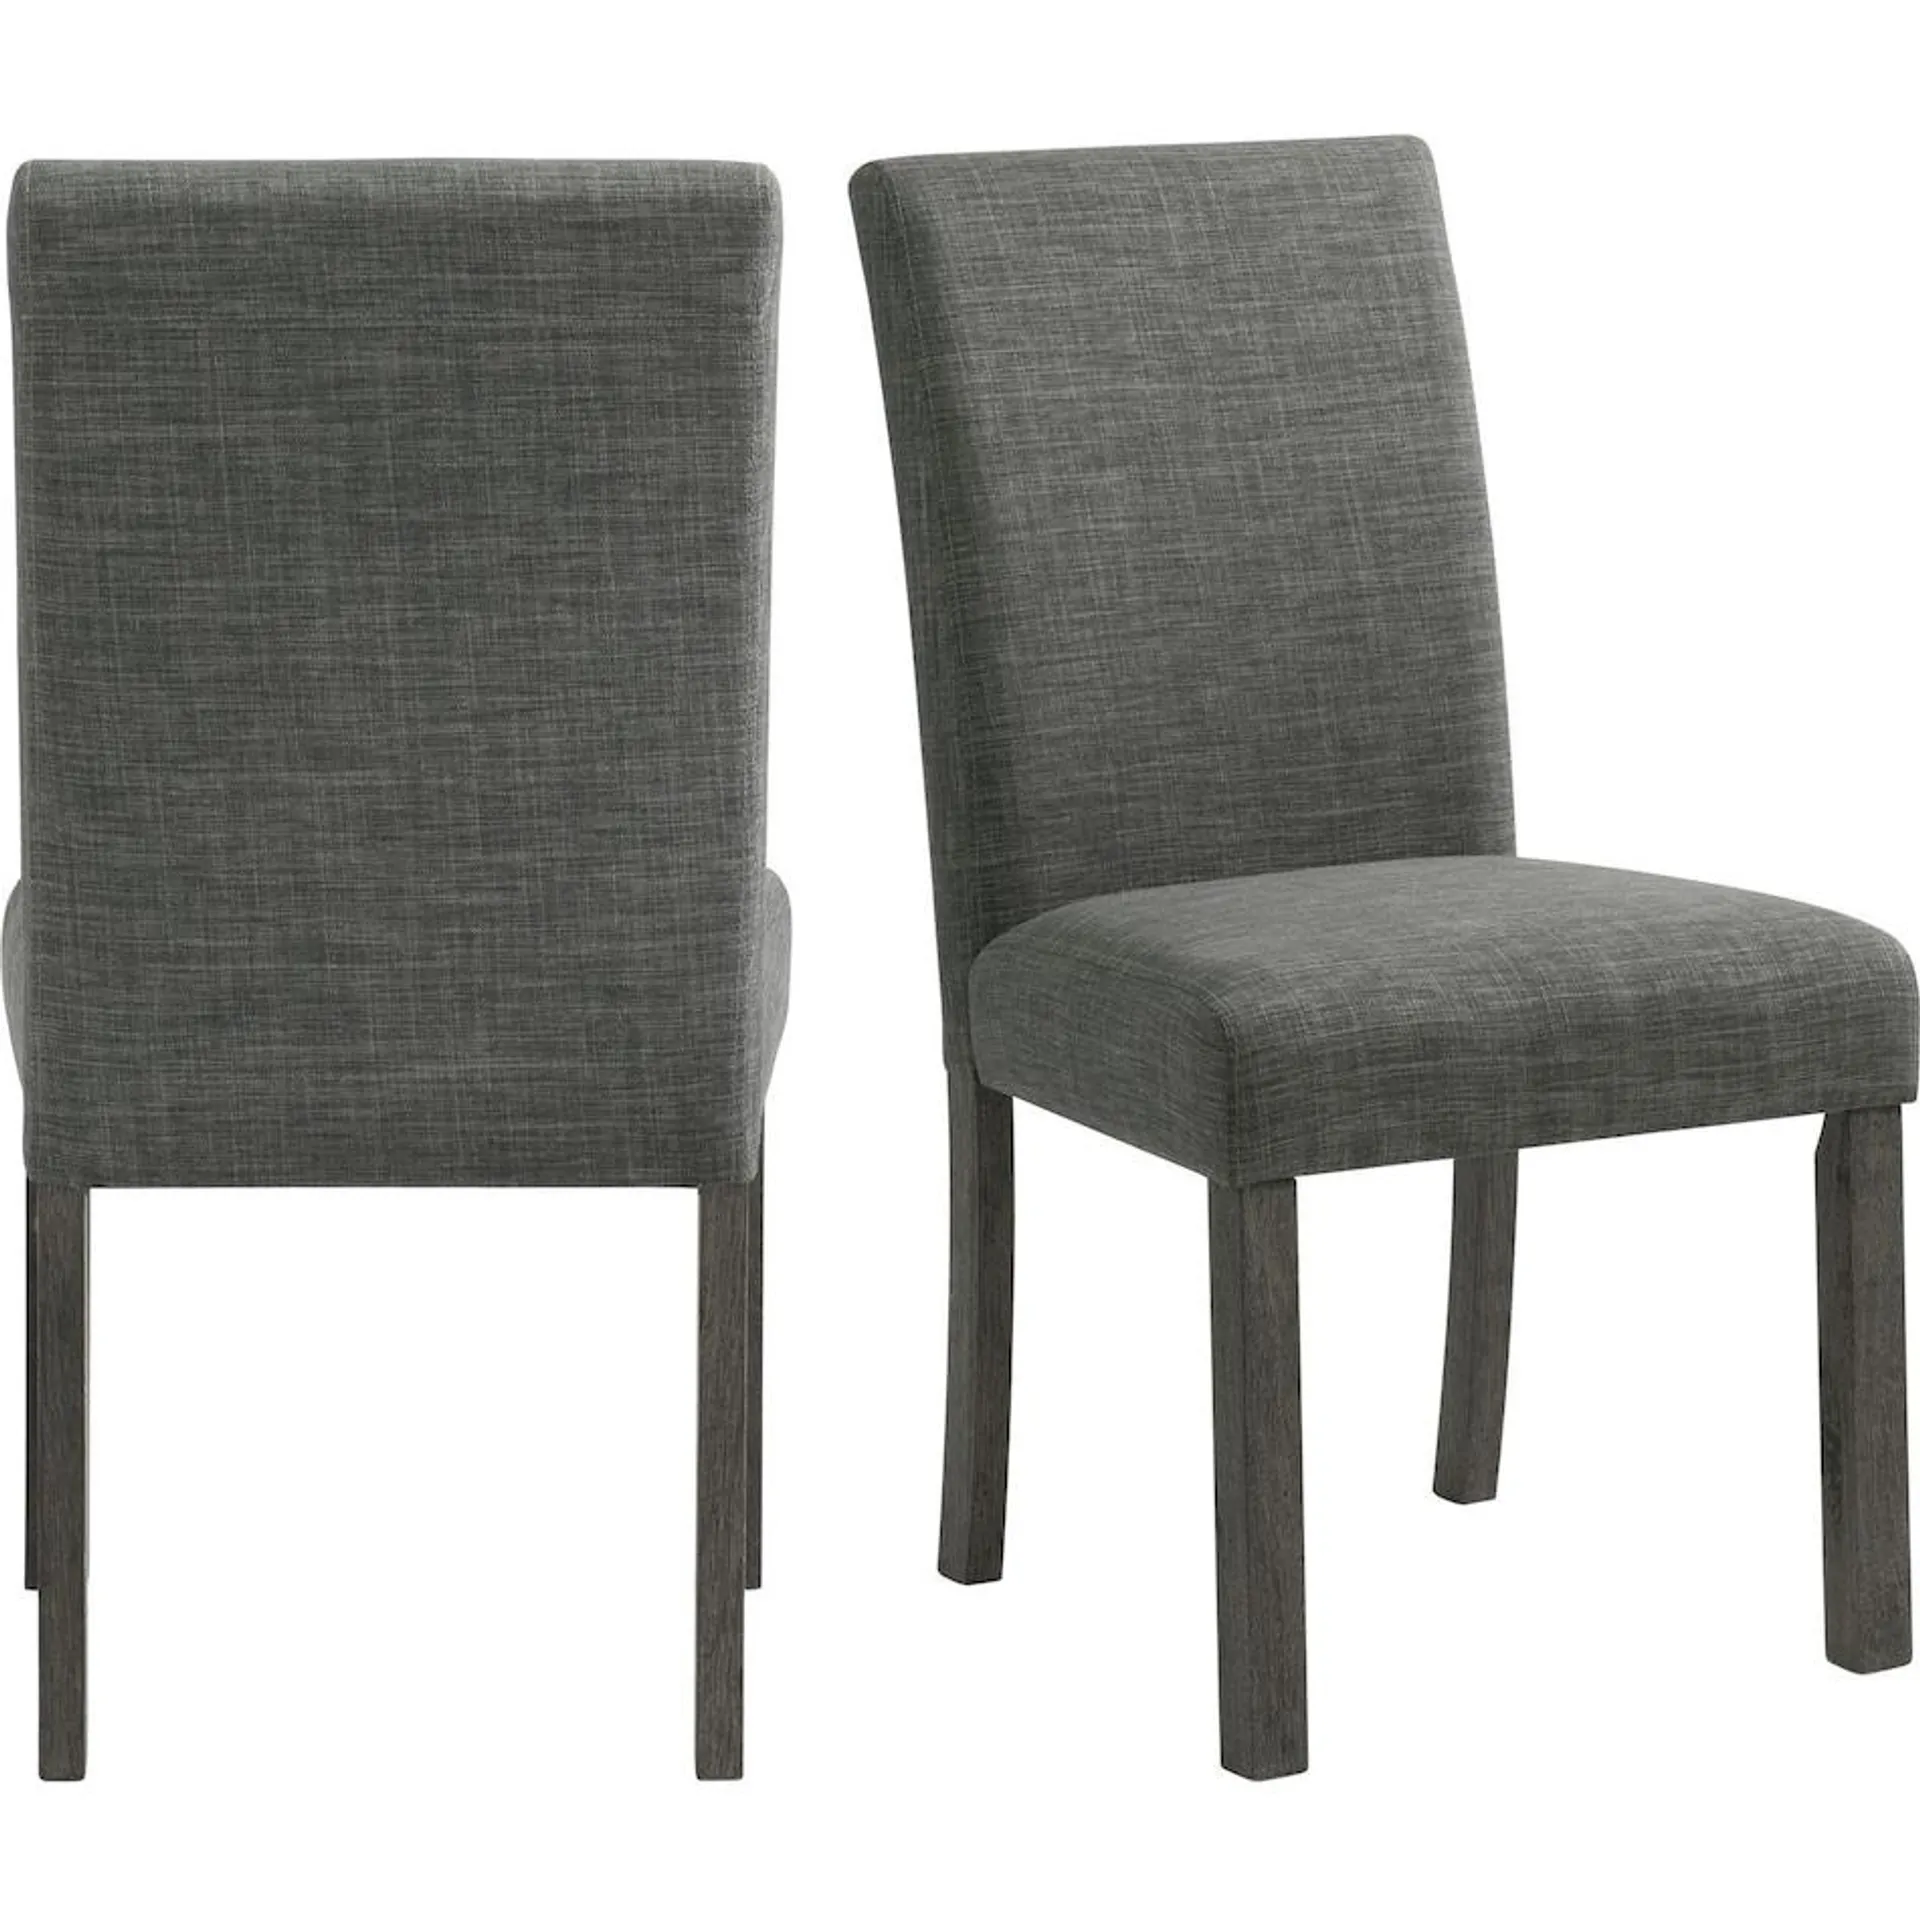 Mirabelle Set of 2 Dining Chairs